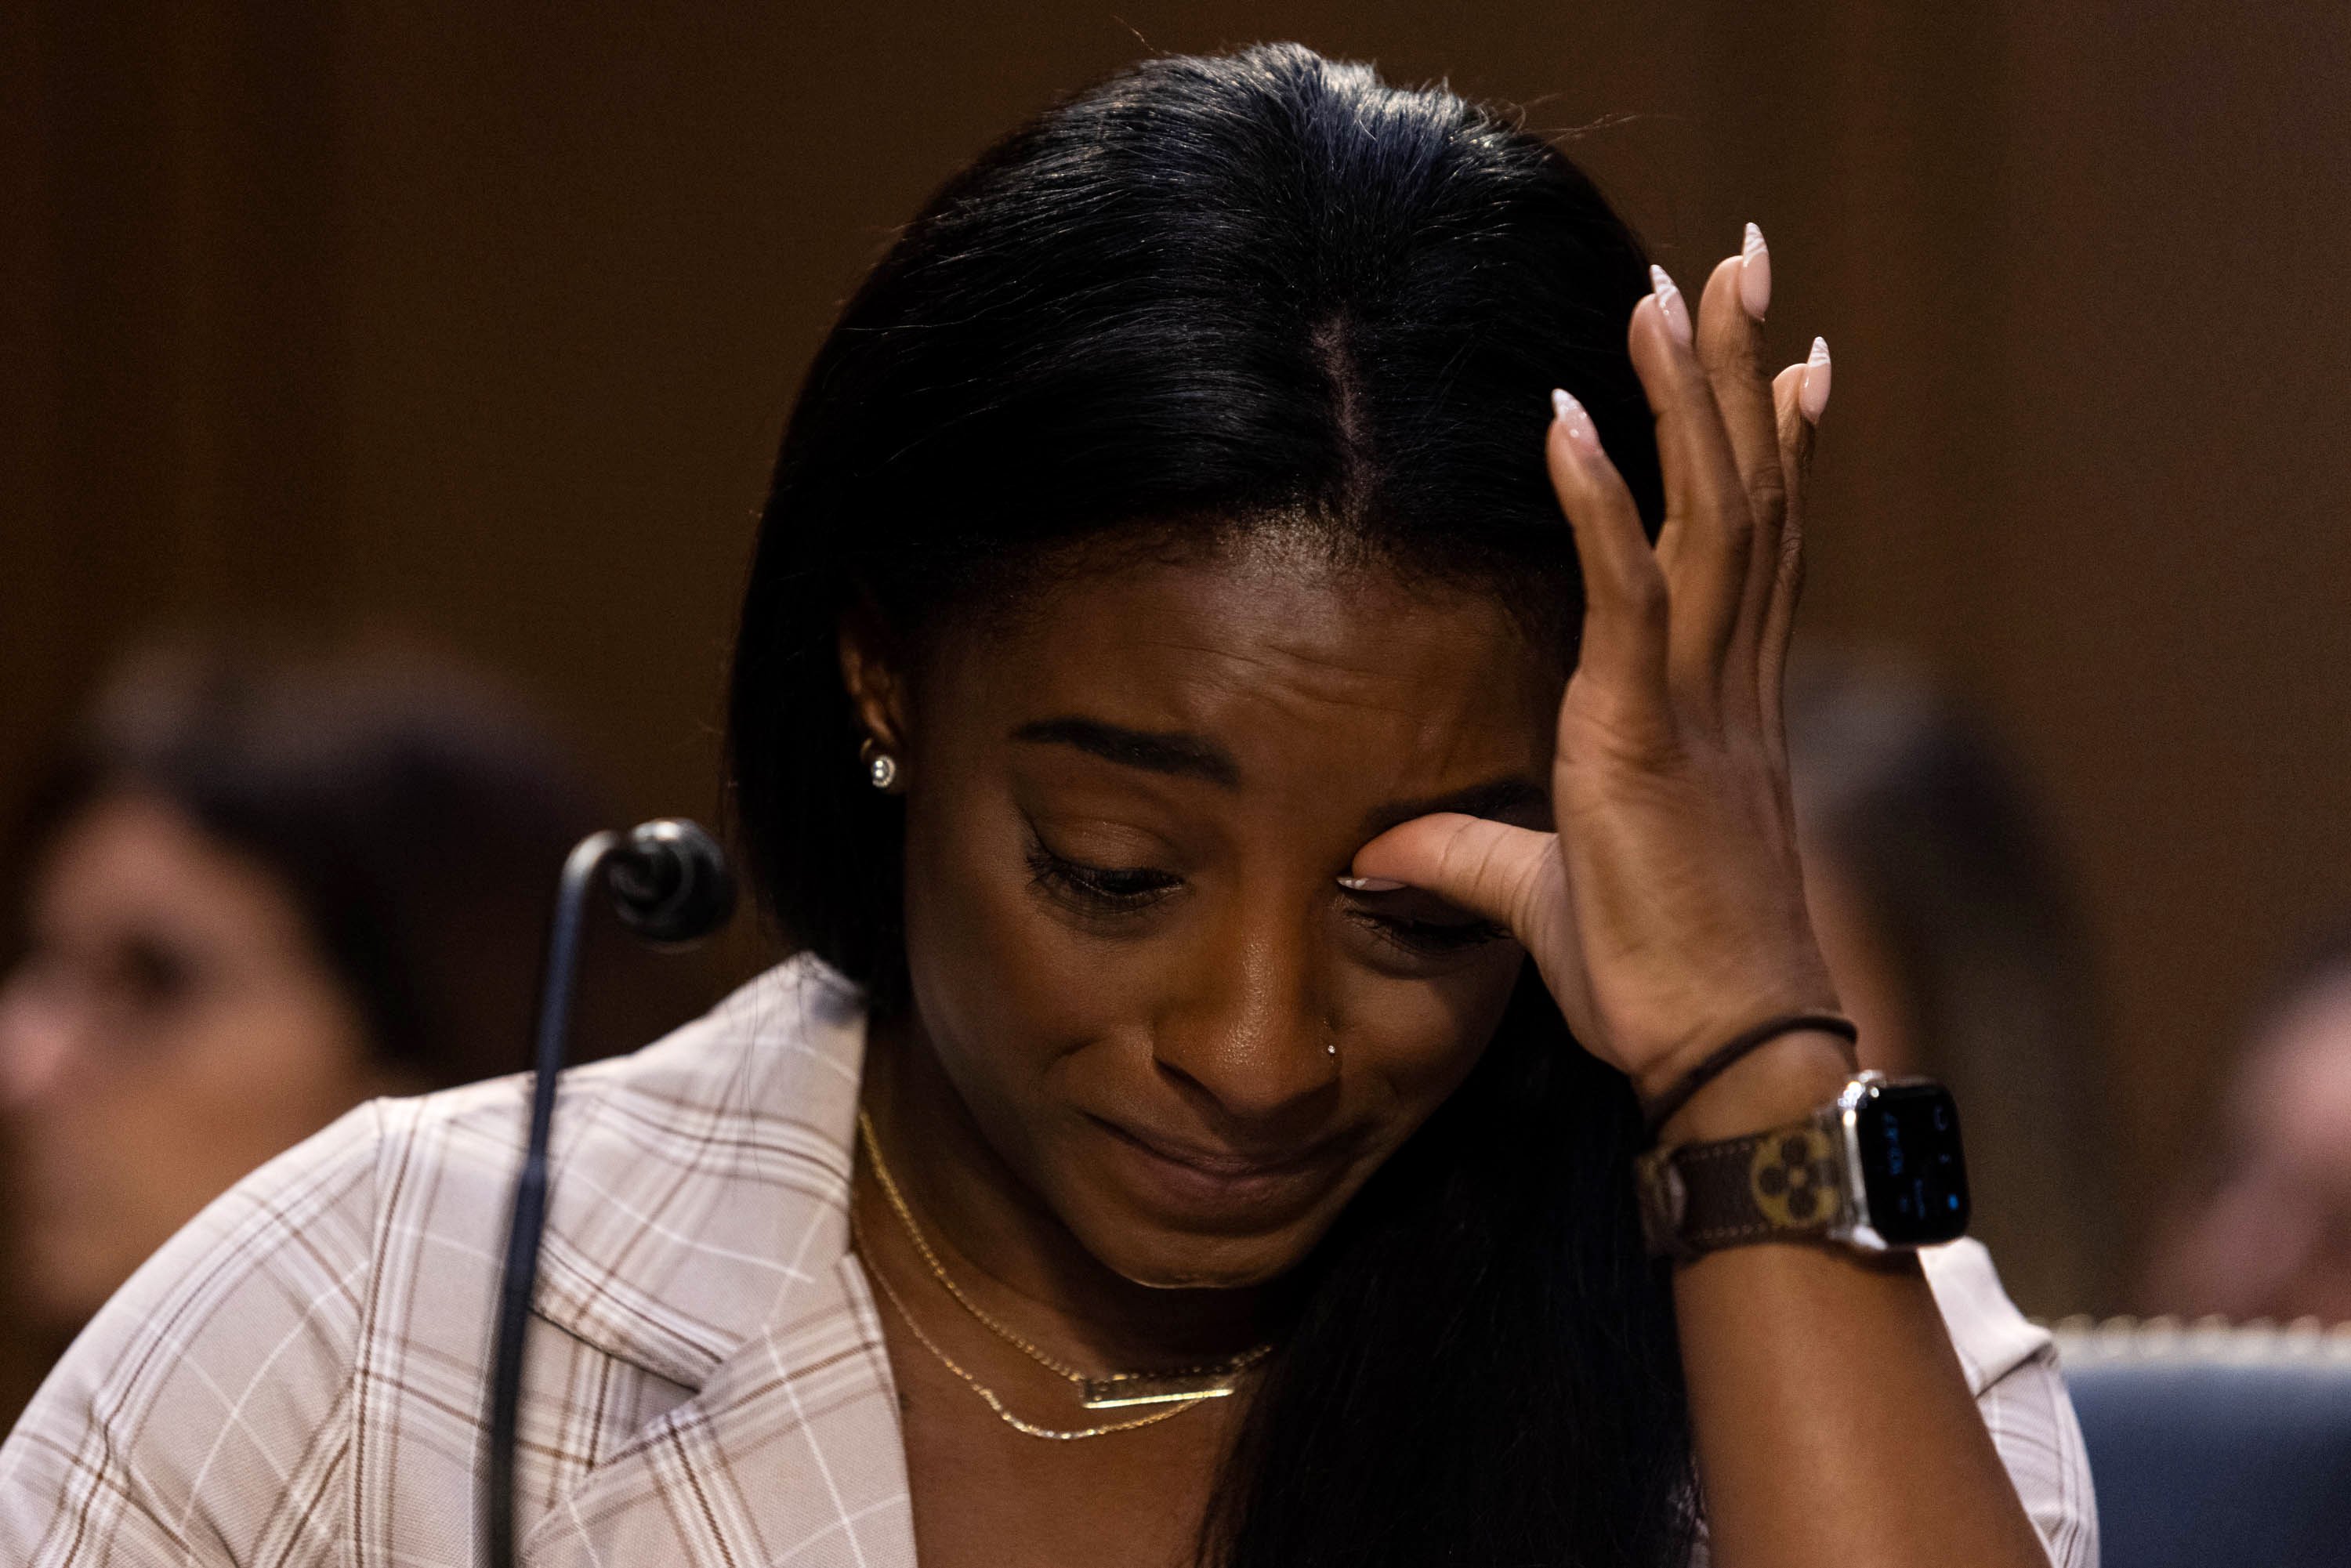 Simone Biles testifies during a Senate Judiciary hearing about the Inspector General's report on the FBI's handling of the Larry Nassar investigation on Capitol Hill, on September 15, 2021 in Washington, DC. | Source: Getty Images